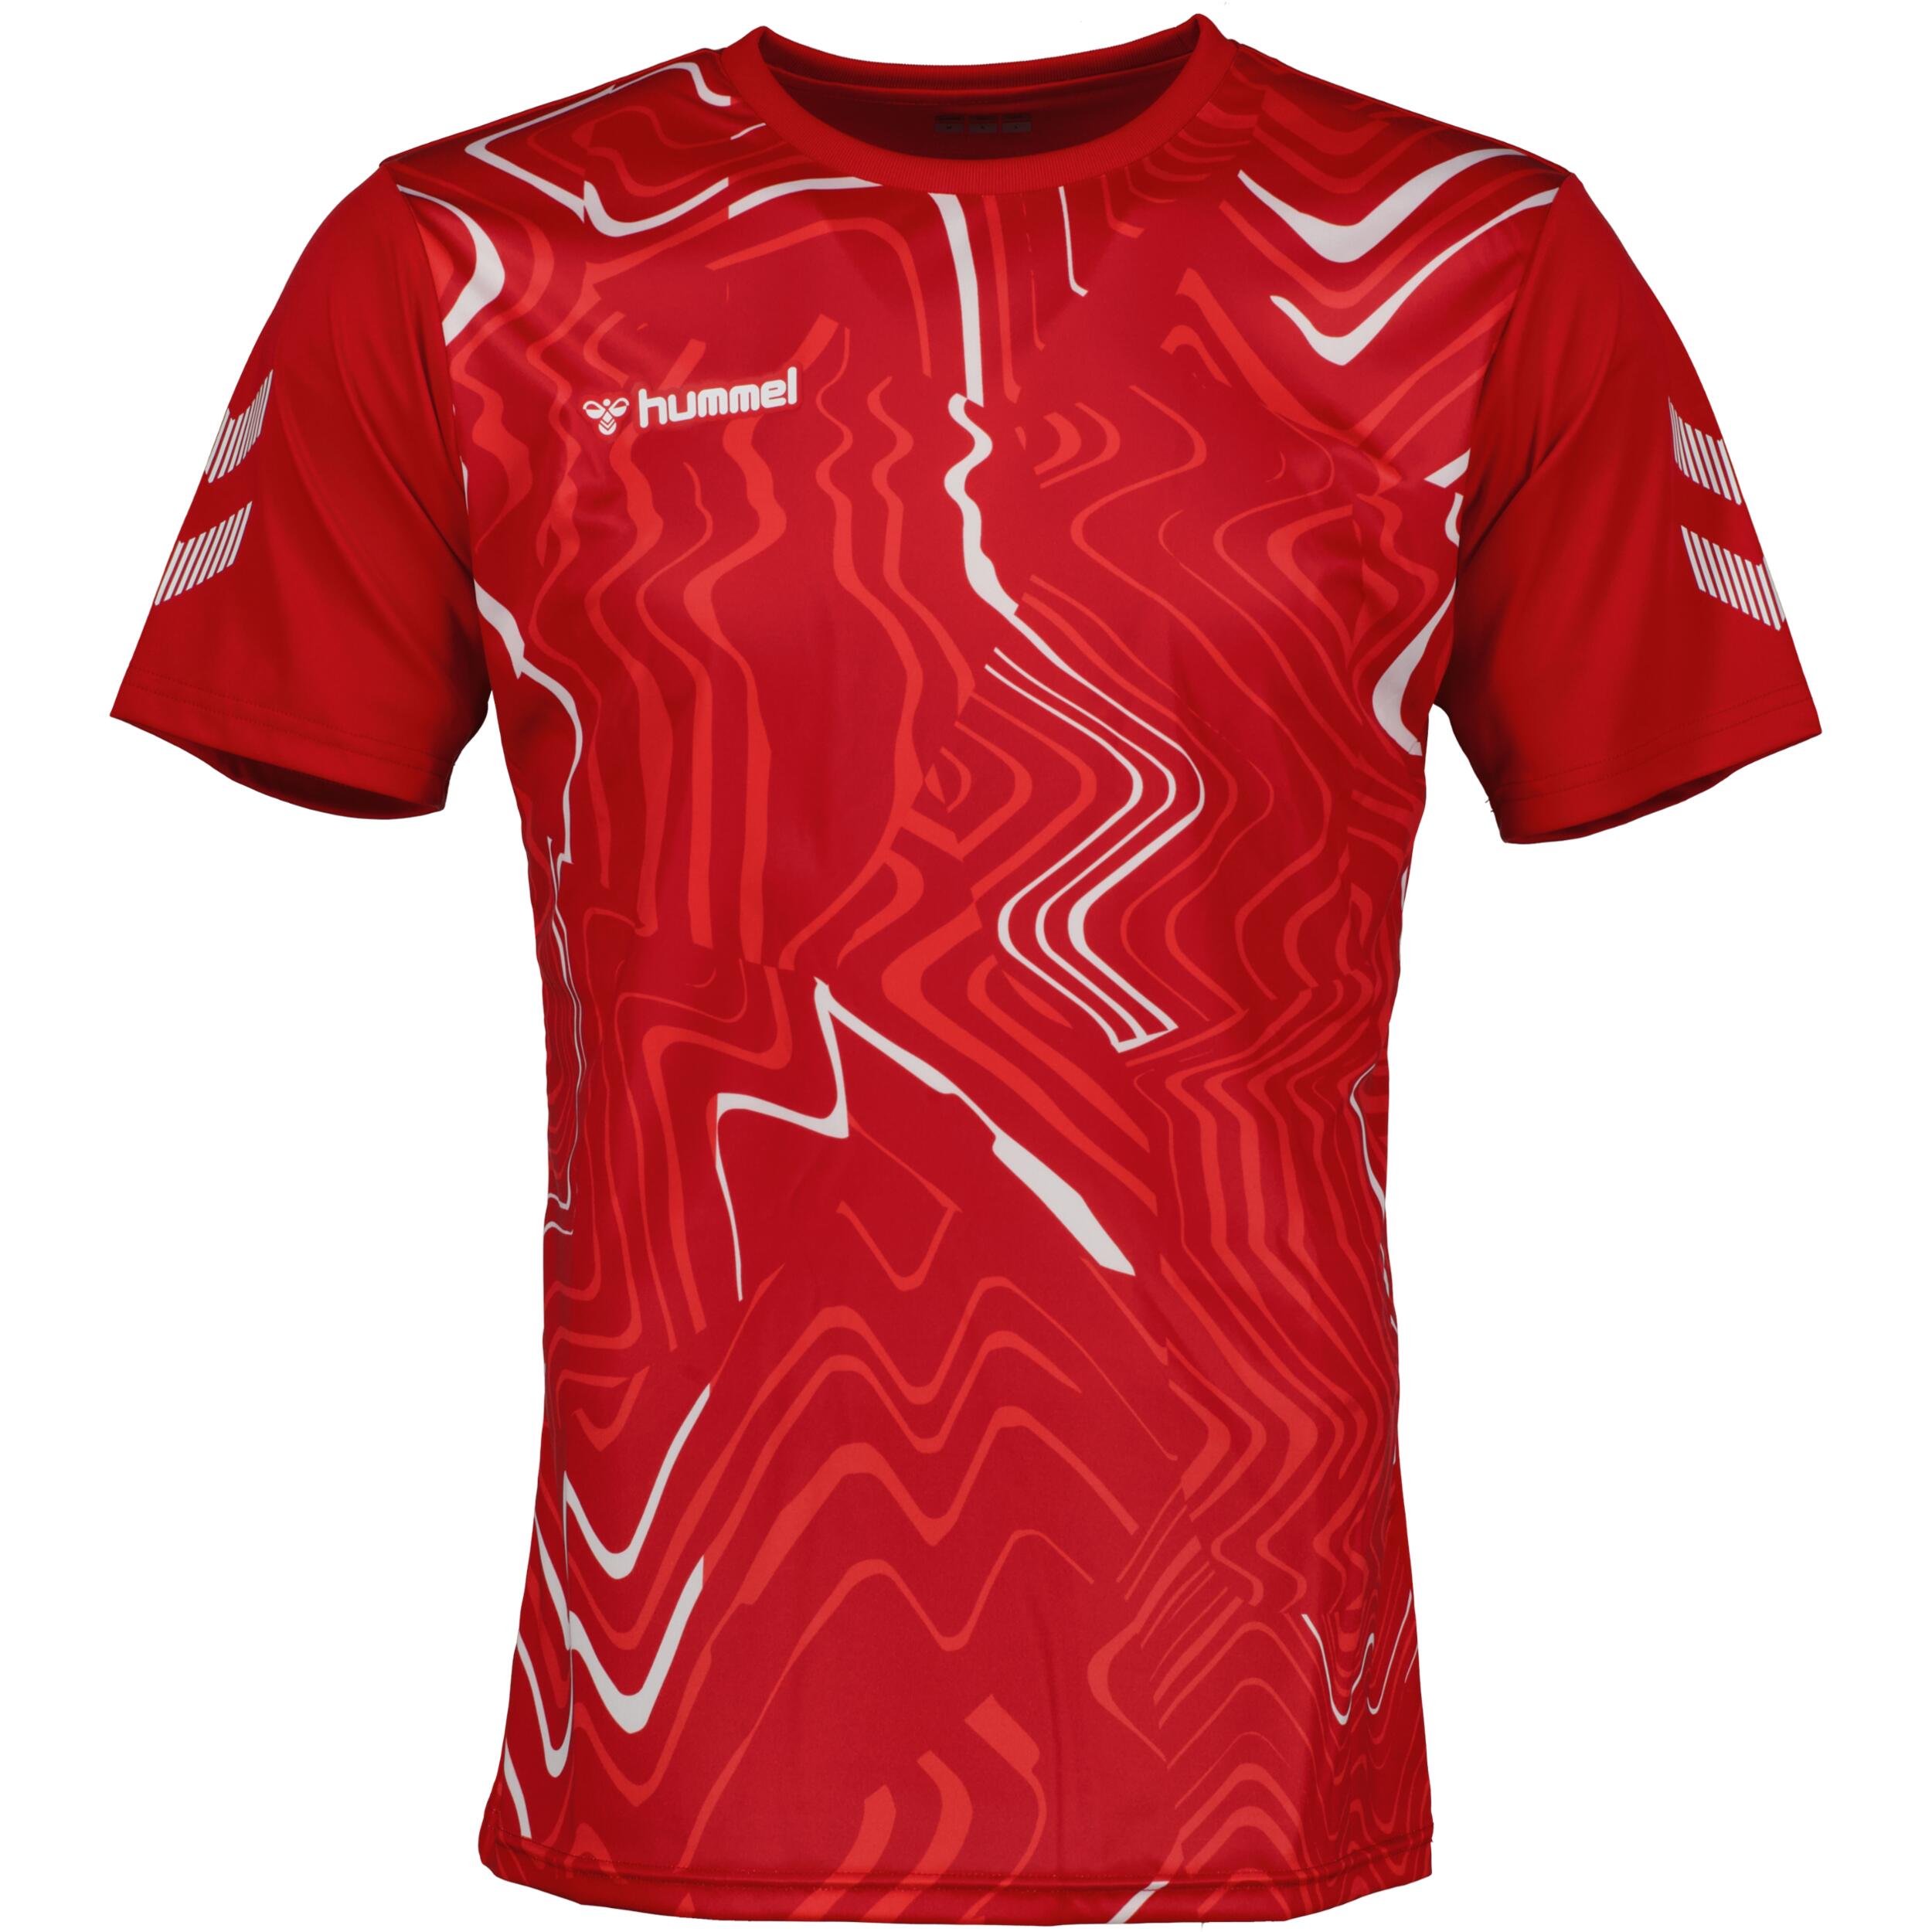 HUMMEL Hydro jersey for men, great for football, in true red/dark red/white